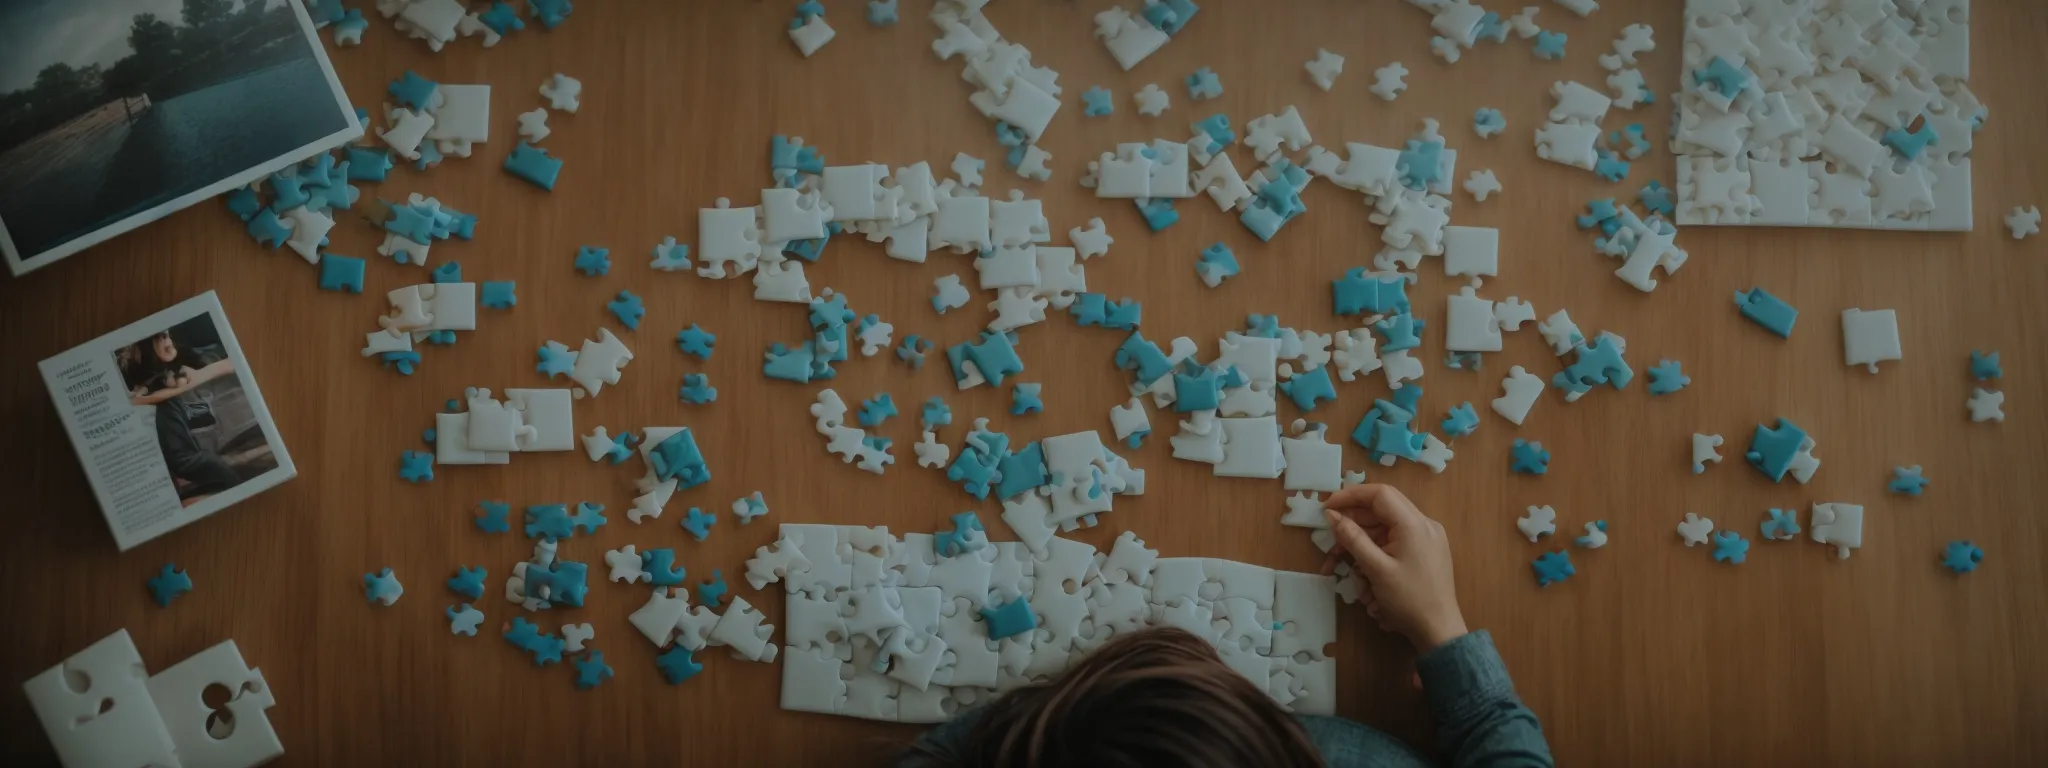 a person pondering over a puzzle missing a piece while surrounded by seo-related icons and charts.